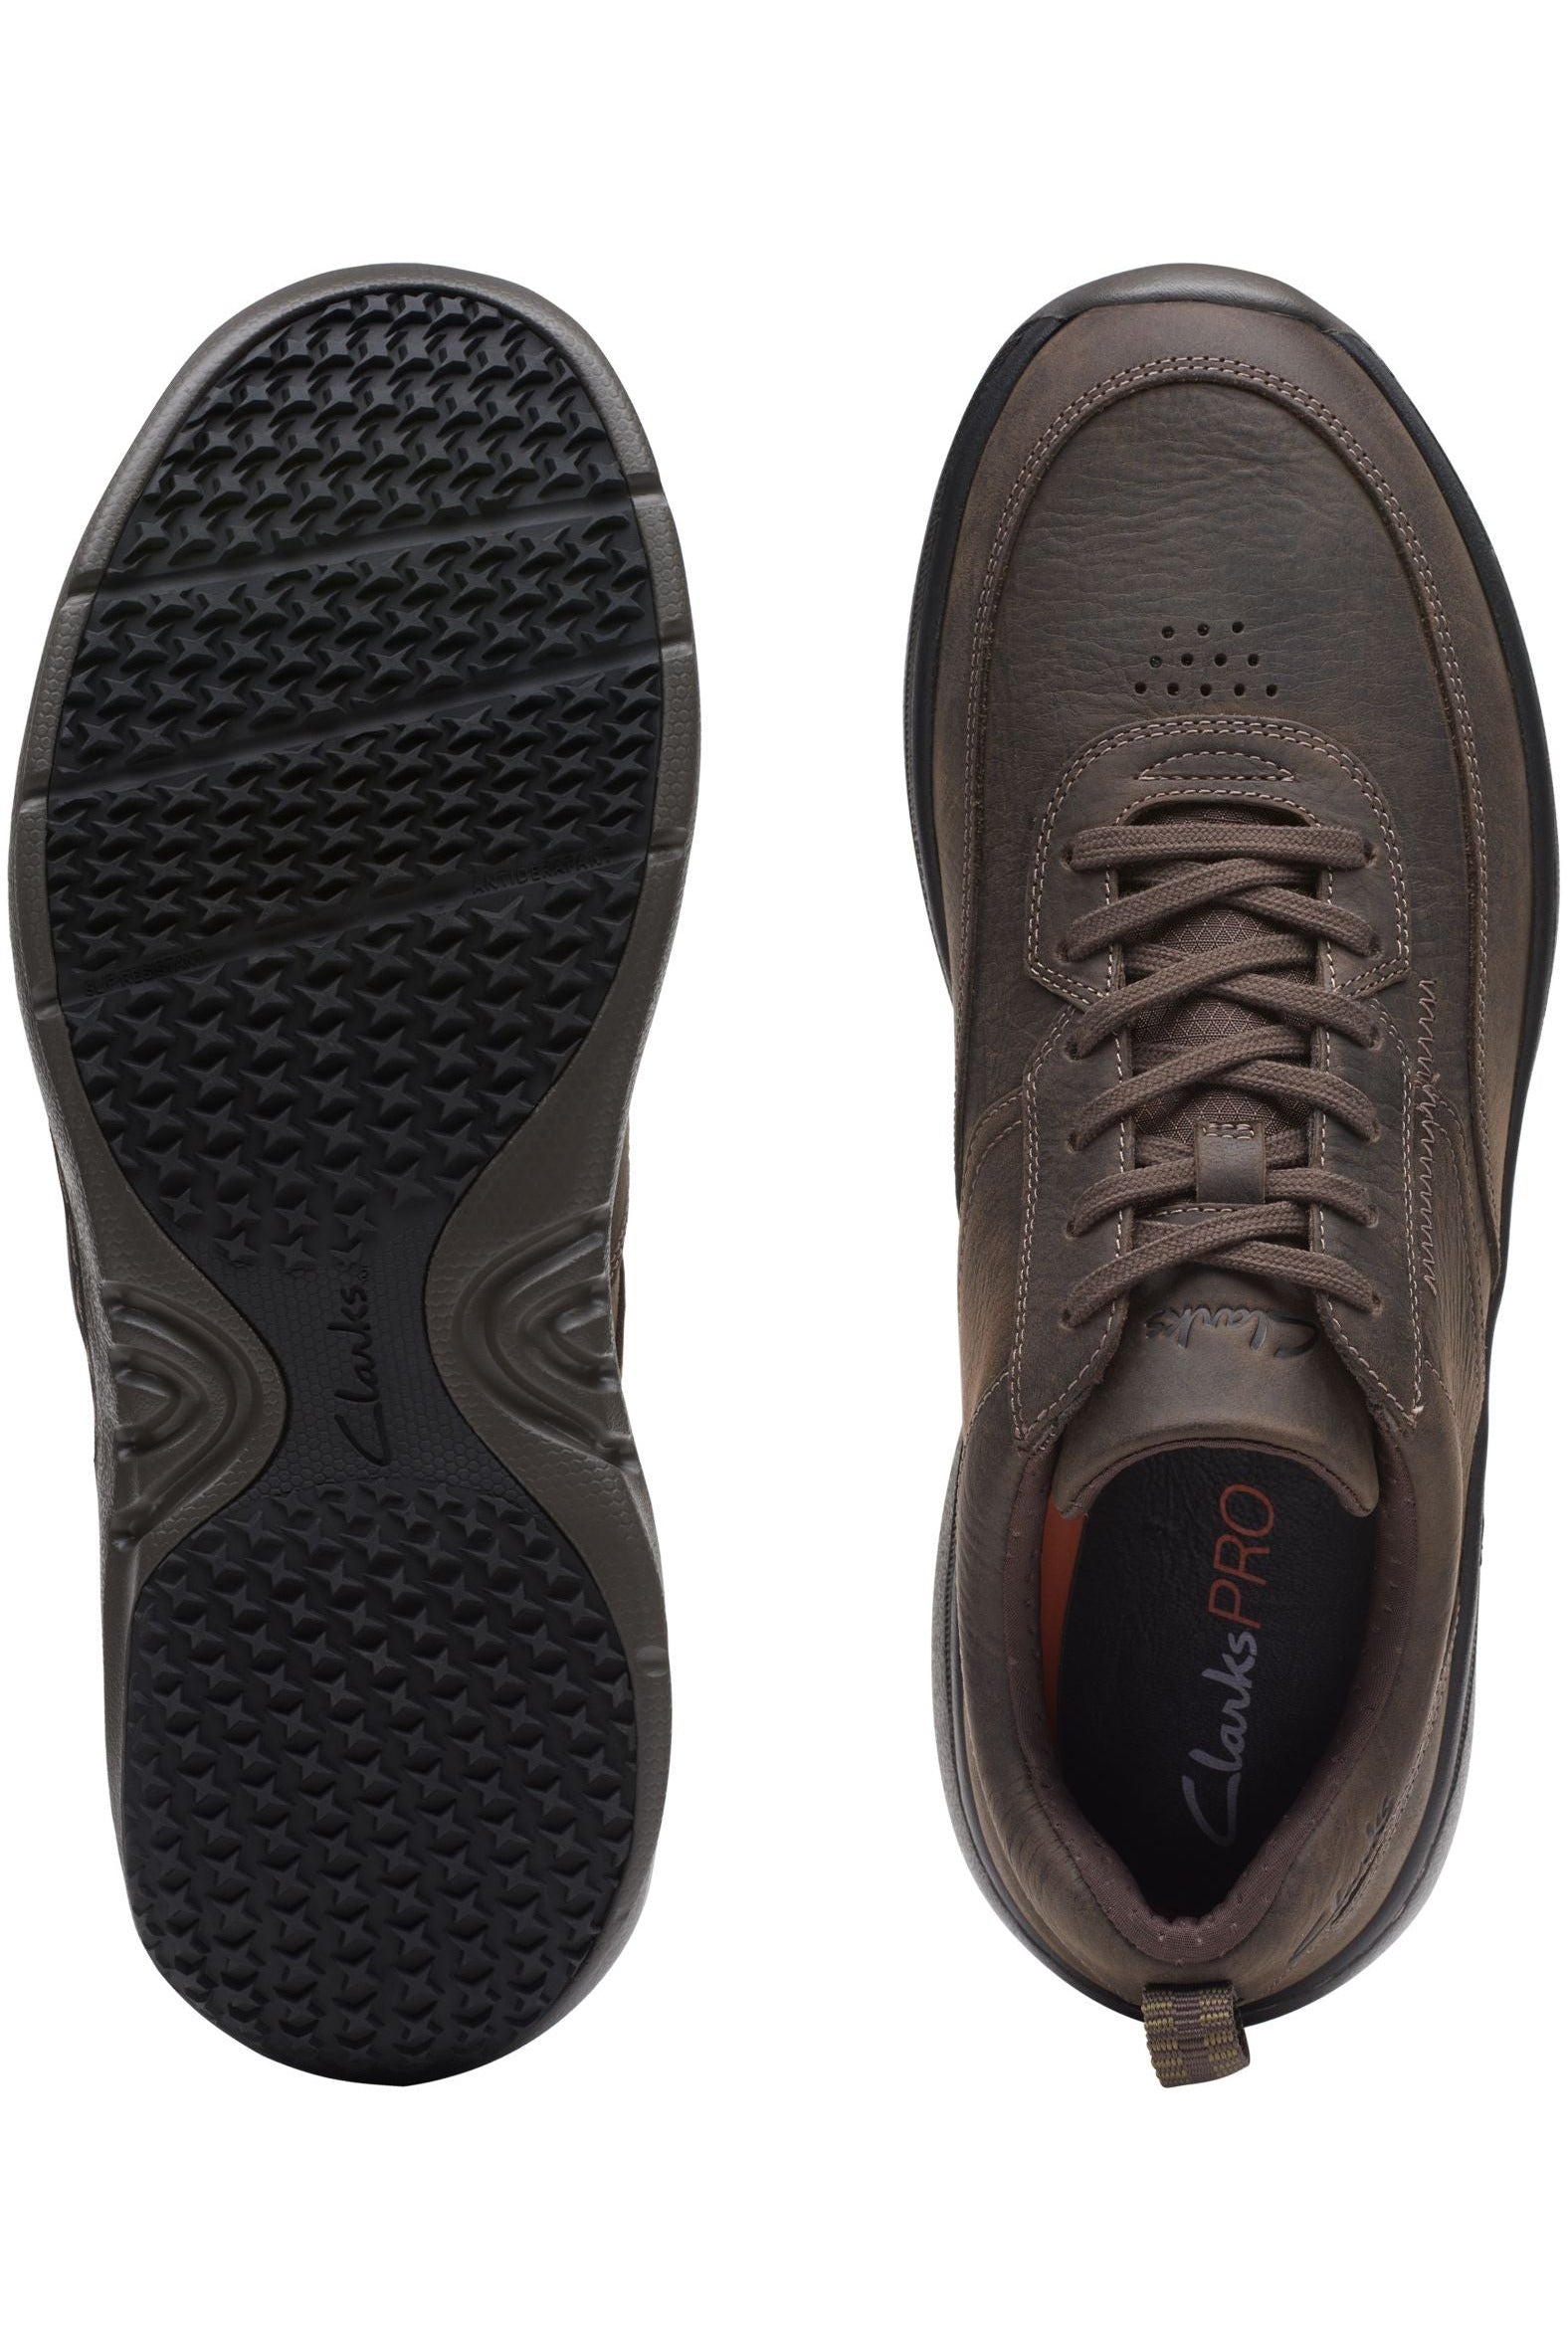 Clarks ClarksPro Lace in Dark Brn Tumble Extra Wide